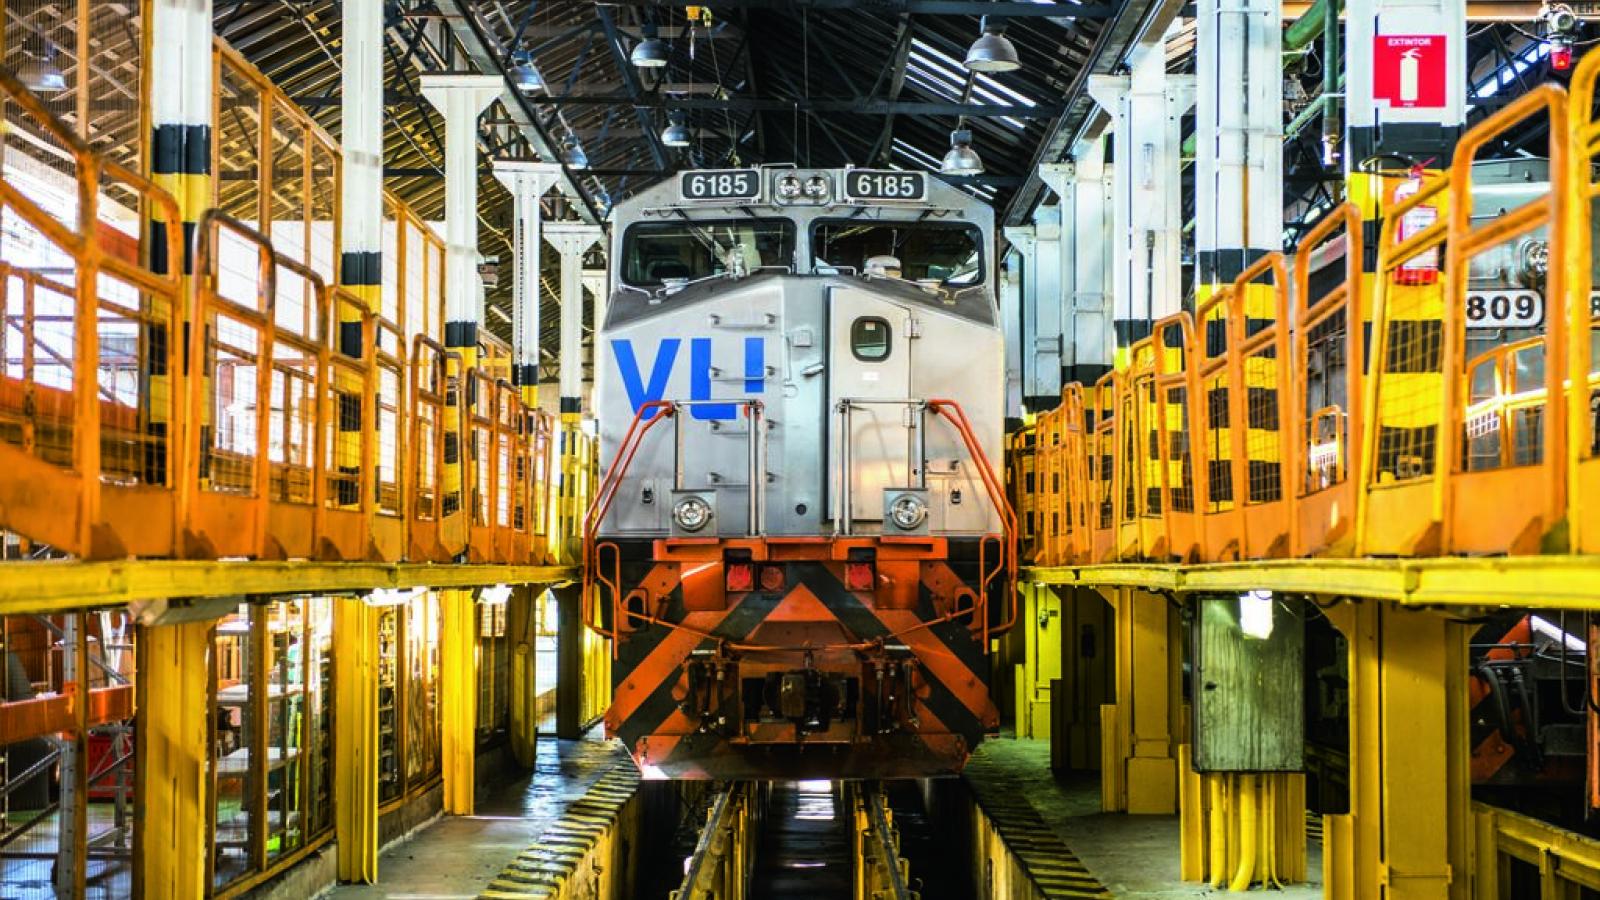 head-on view of locomotive with VLI logo